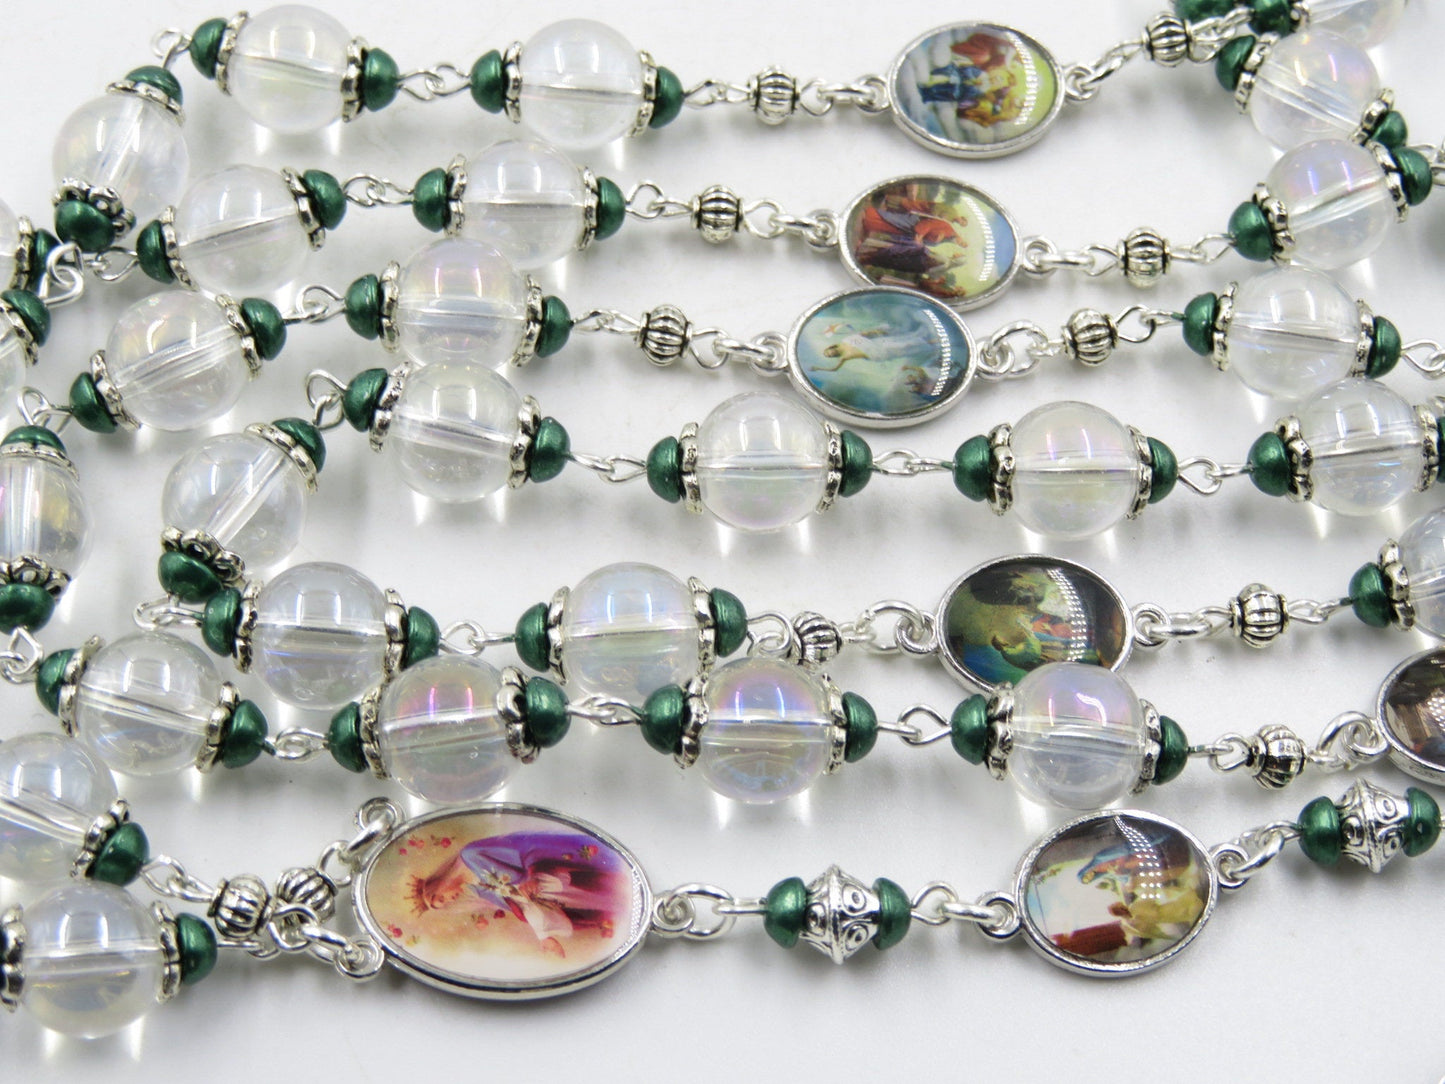 Heirloom Rosary of the Seven Joys of Our Lady, prayer chaplet beads, Dolor rosary beads, dolour rosaries, Rosary gift, Rosary.